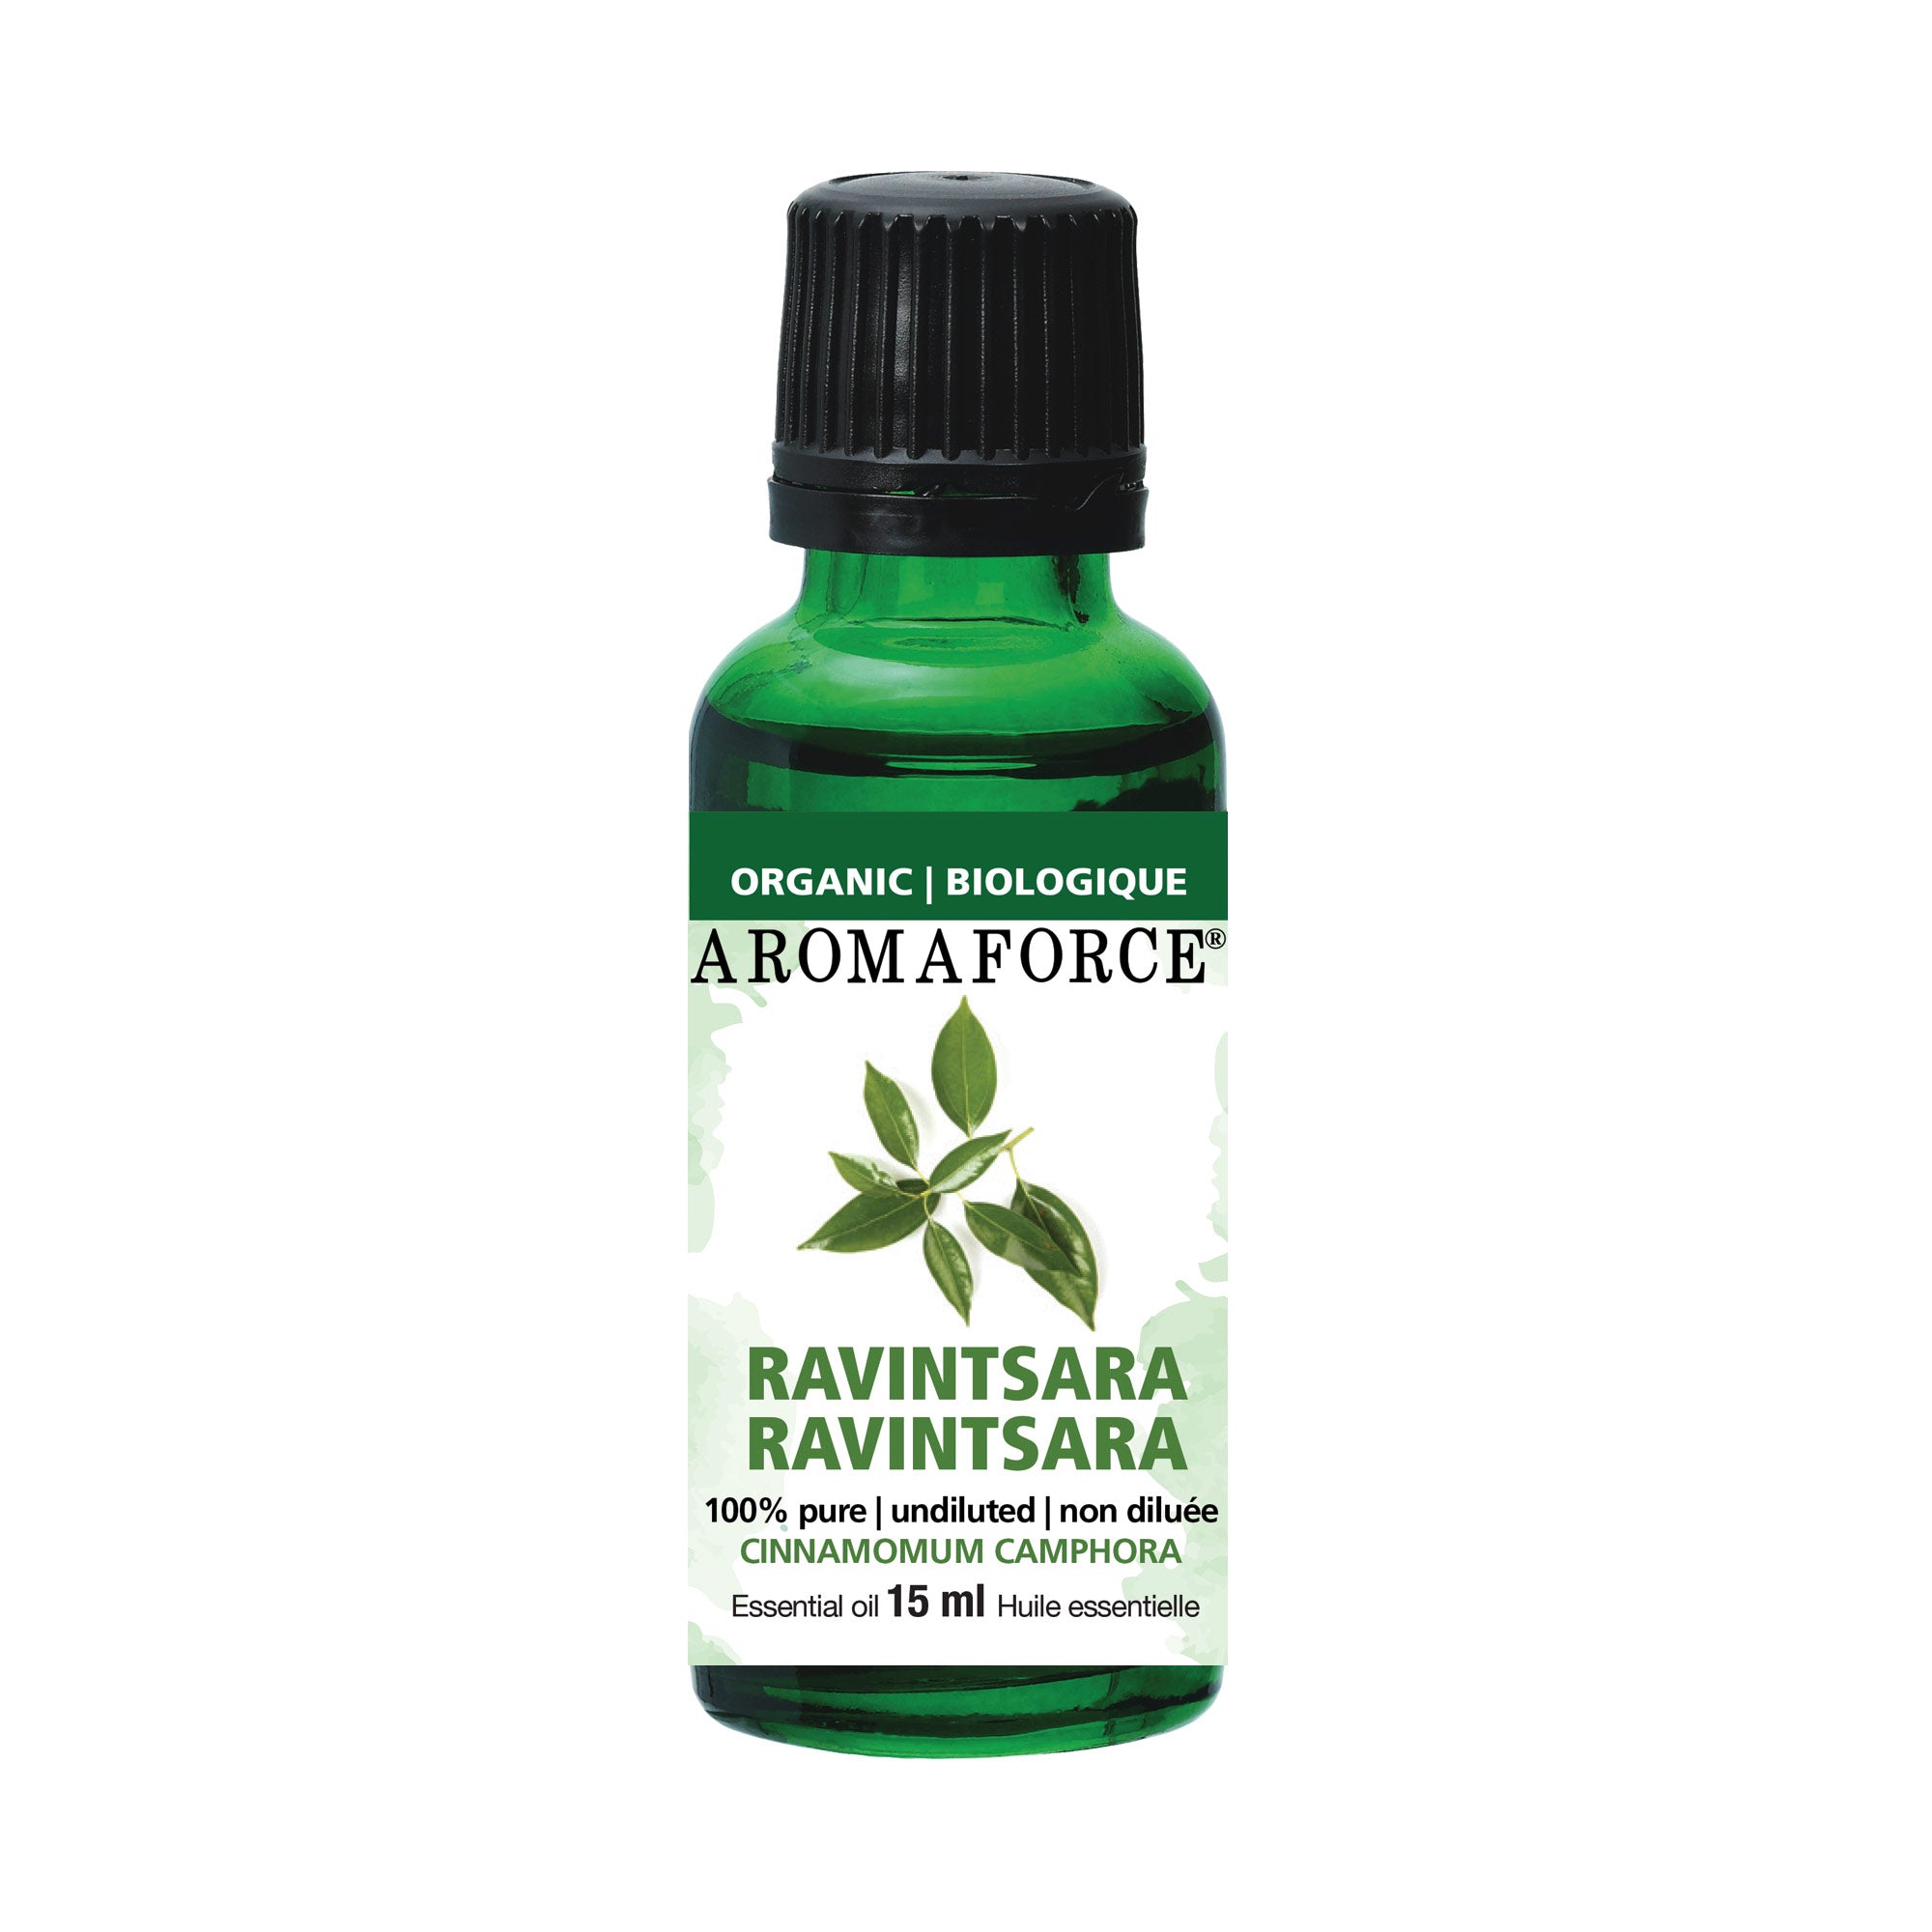 Ravintsara Organic Essential Oil 100% pure and natural 15mL - Aromaforce - A.Vogel Canada